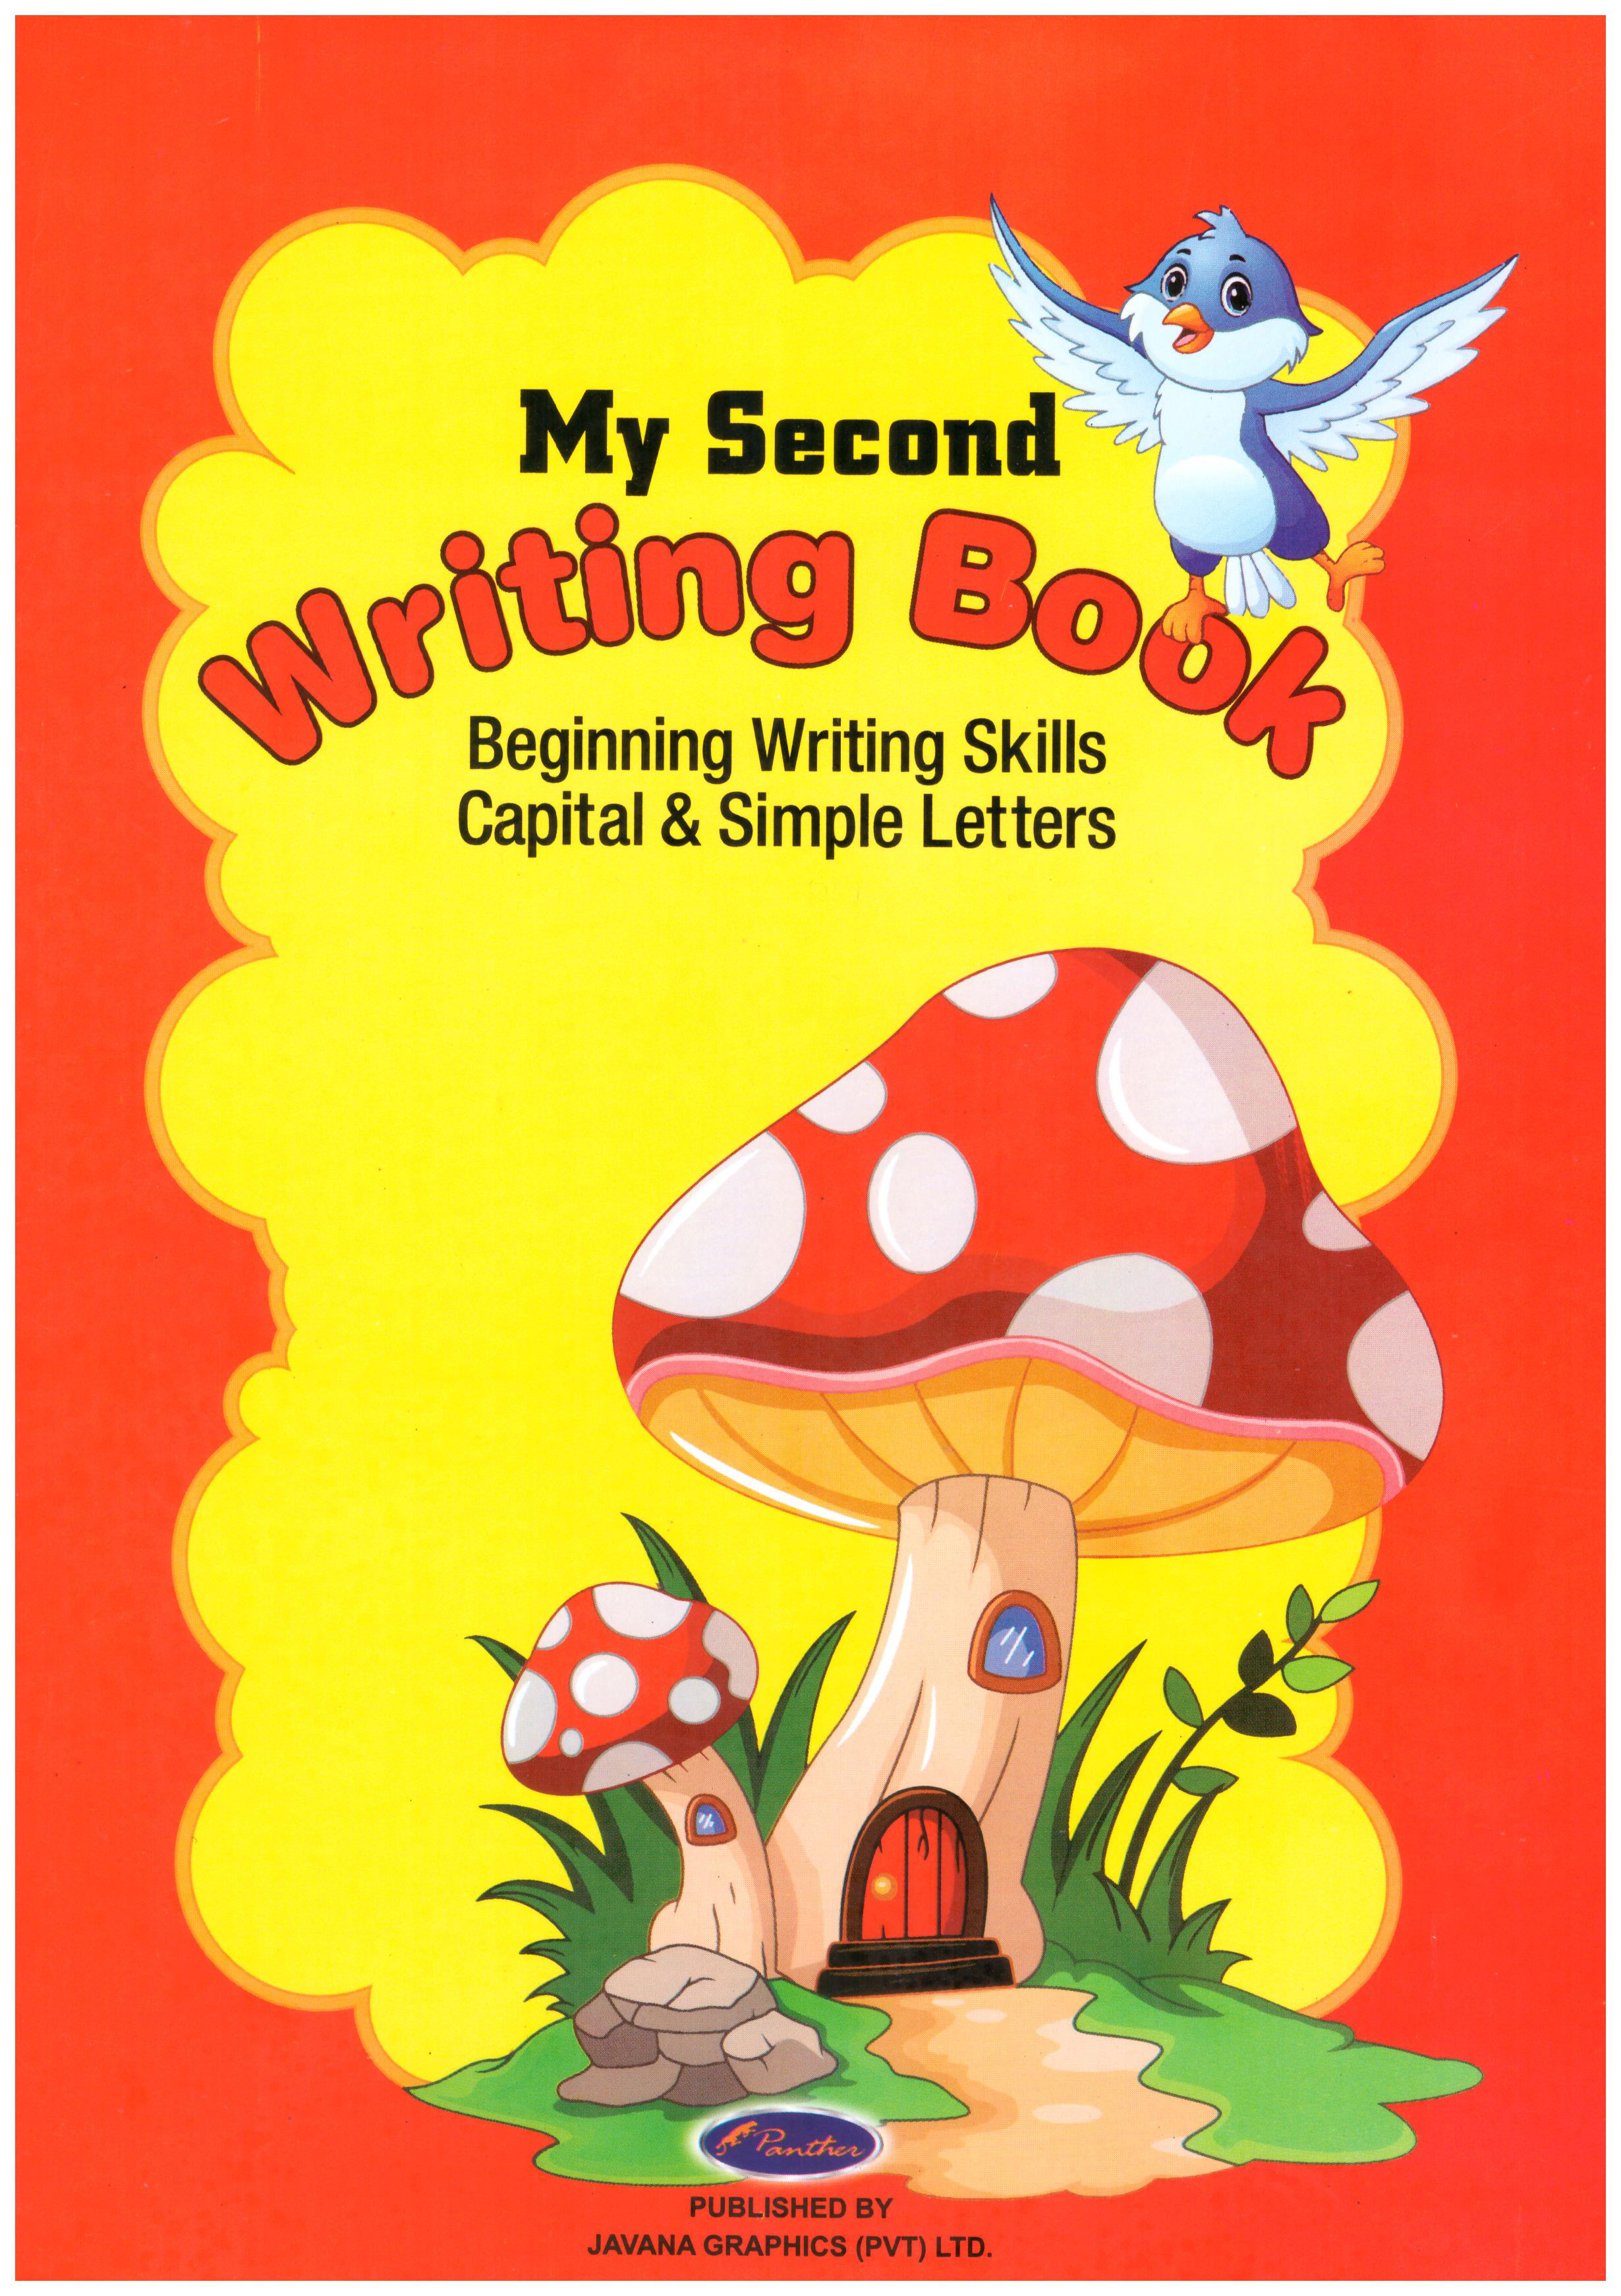 My Second Writing Book Beginning Writing Skills Capital and Simple Letters